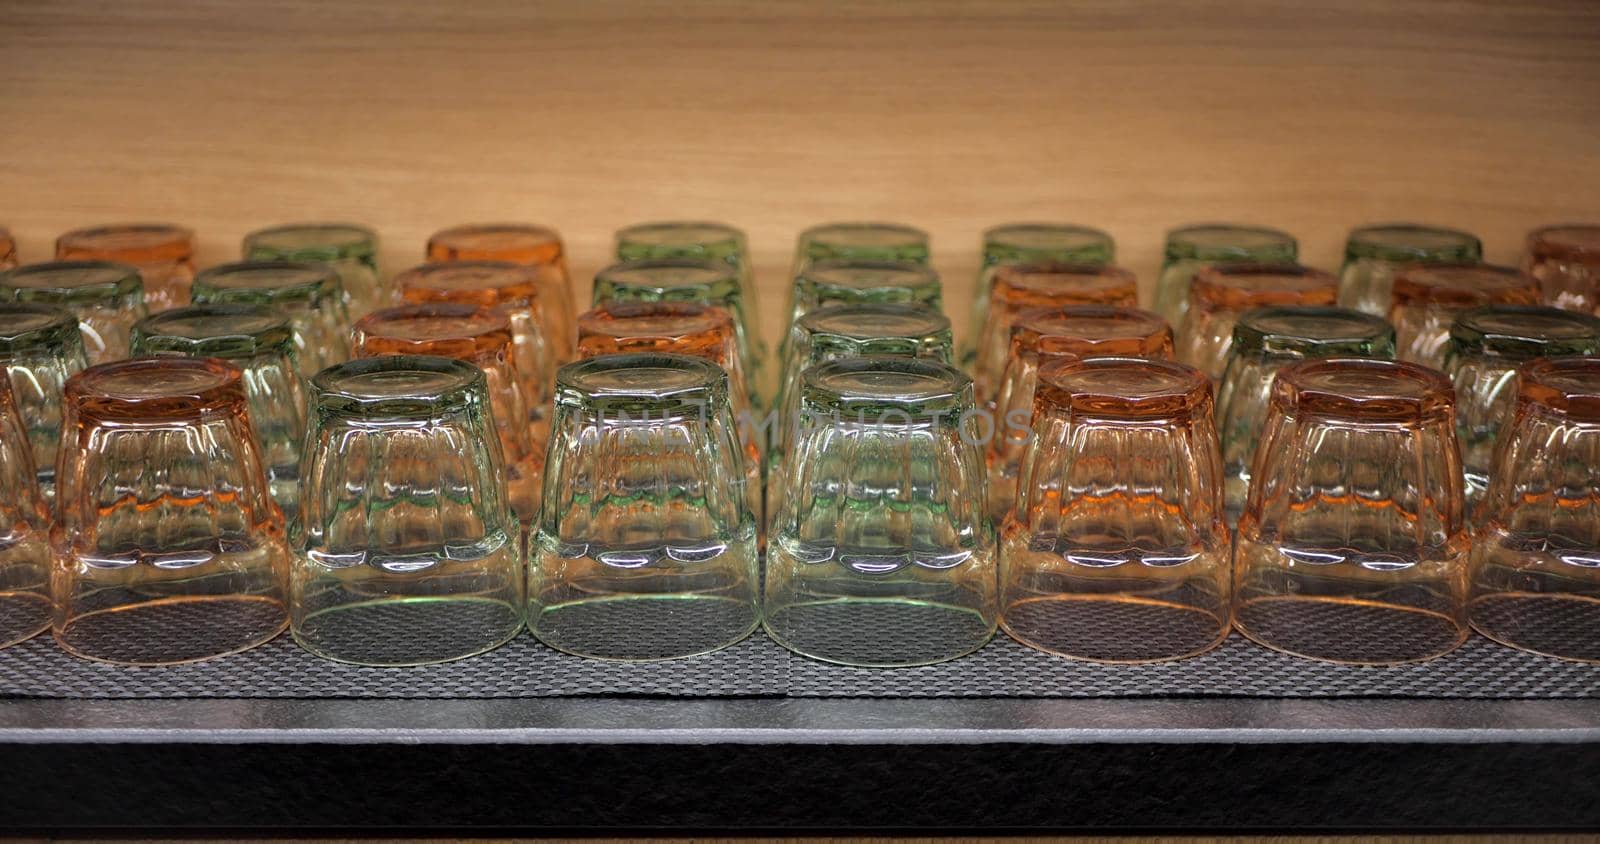 Turned drinking glasses of different colours in a wooden kitchen cabinet cupboard. Orange and green transparent glasses for water or juice. by apavlin